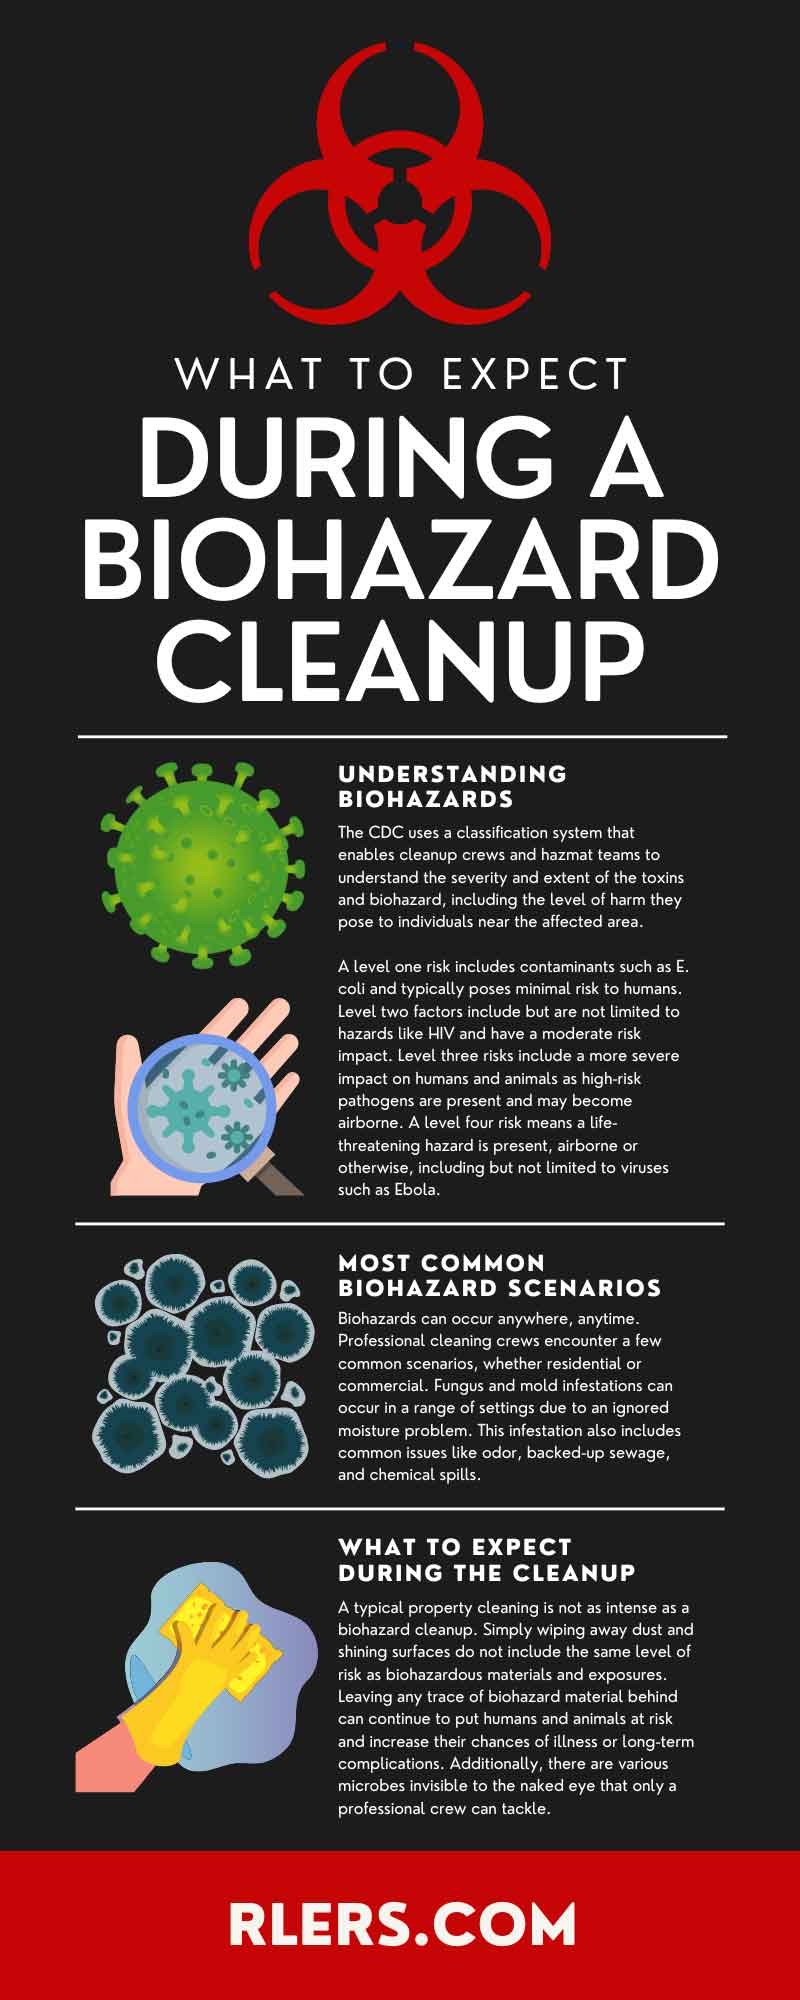 What To Expect During a Biohazard Cleanup 